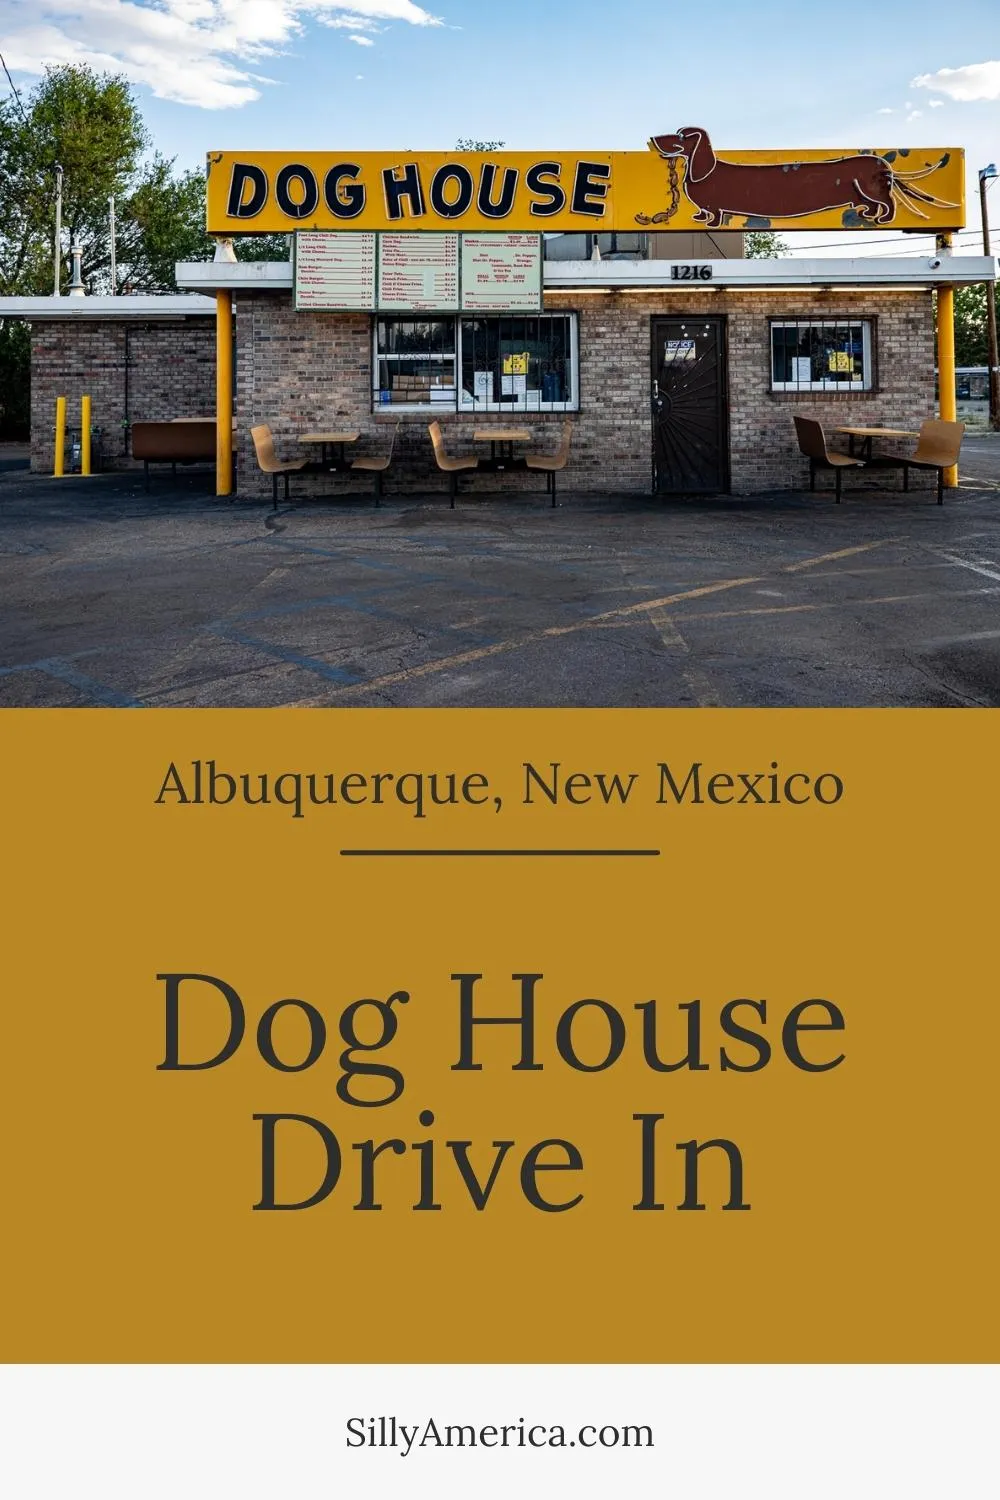 The Dog House Drive In in Albuquerque, New Mexico is known for its fun neon sign, tasty chili cheese dogs, Route 66 location, and television cameos. Stop at thie New Mexico Route 66 restaurant for a chili dog with cheese, fries, and a milkshake. The perfect road trip meal for lunch or dinner. This Albuquerque roadside attraction is featured in Breaking Bad and Better Call Saul. Look for the neon sign with a Dachshund wiener dog. #Route66 #Route66RoadTrip #NewMexicoRoute66